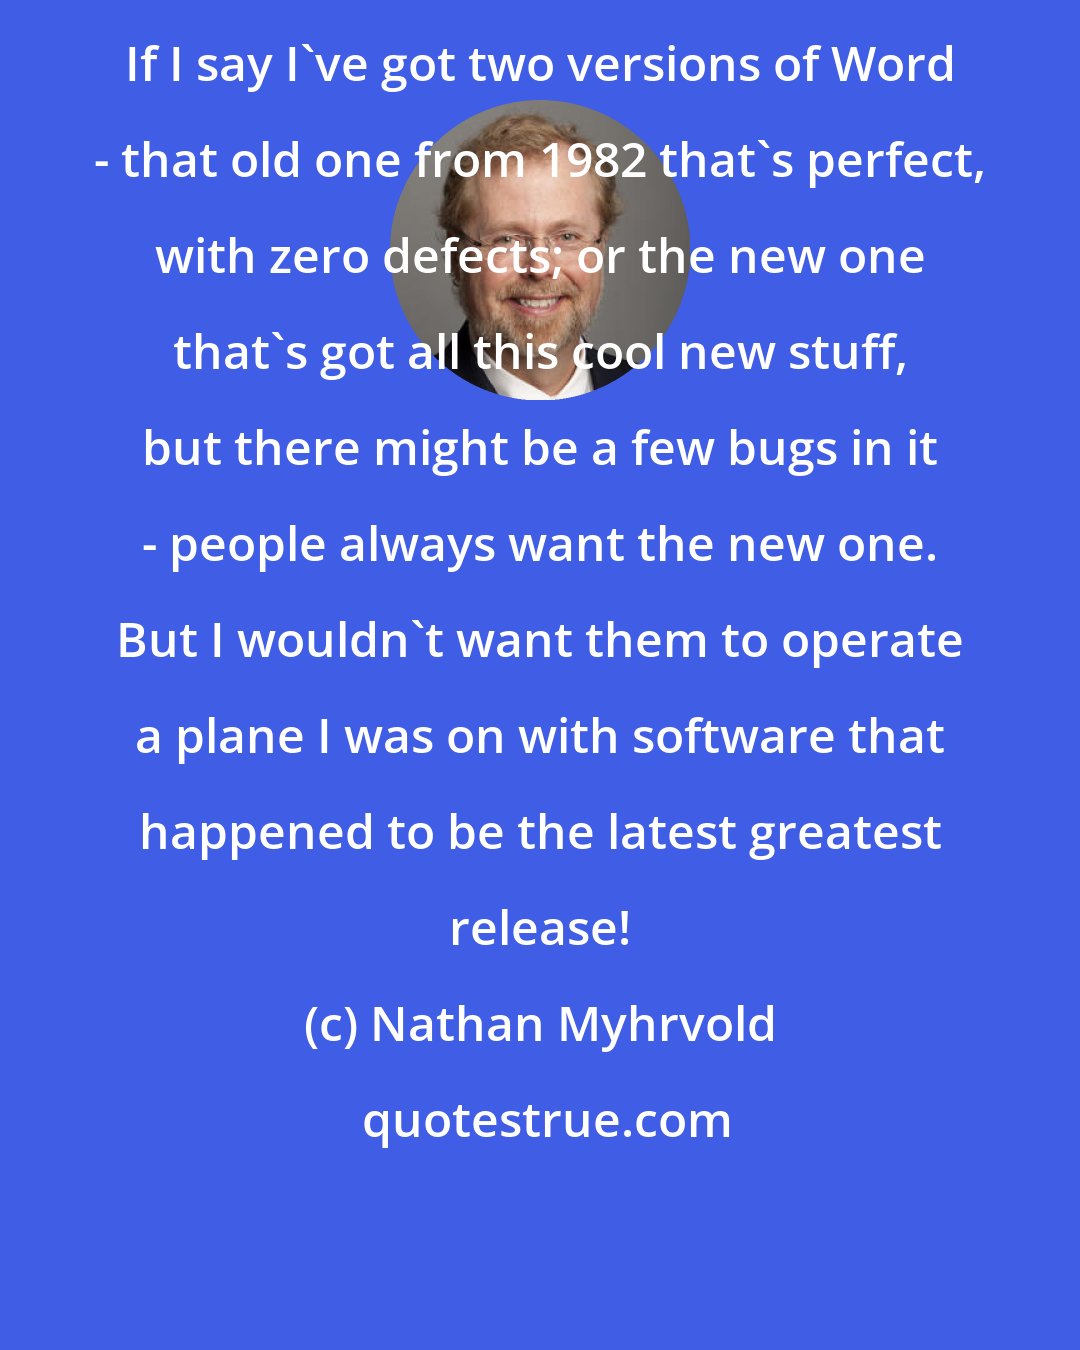 Nathan Myhrvold: If I say I've got two versions of Word - that old one from 1982 that's perfect, with zero defects; or the new one that's got all this cool new stuff, but there might be a few bugs in it - people always want the new one. But I wouldn't want them to operate a plane I was on with software that happened to be the latest greatest release!